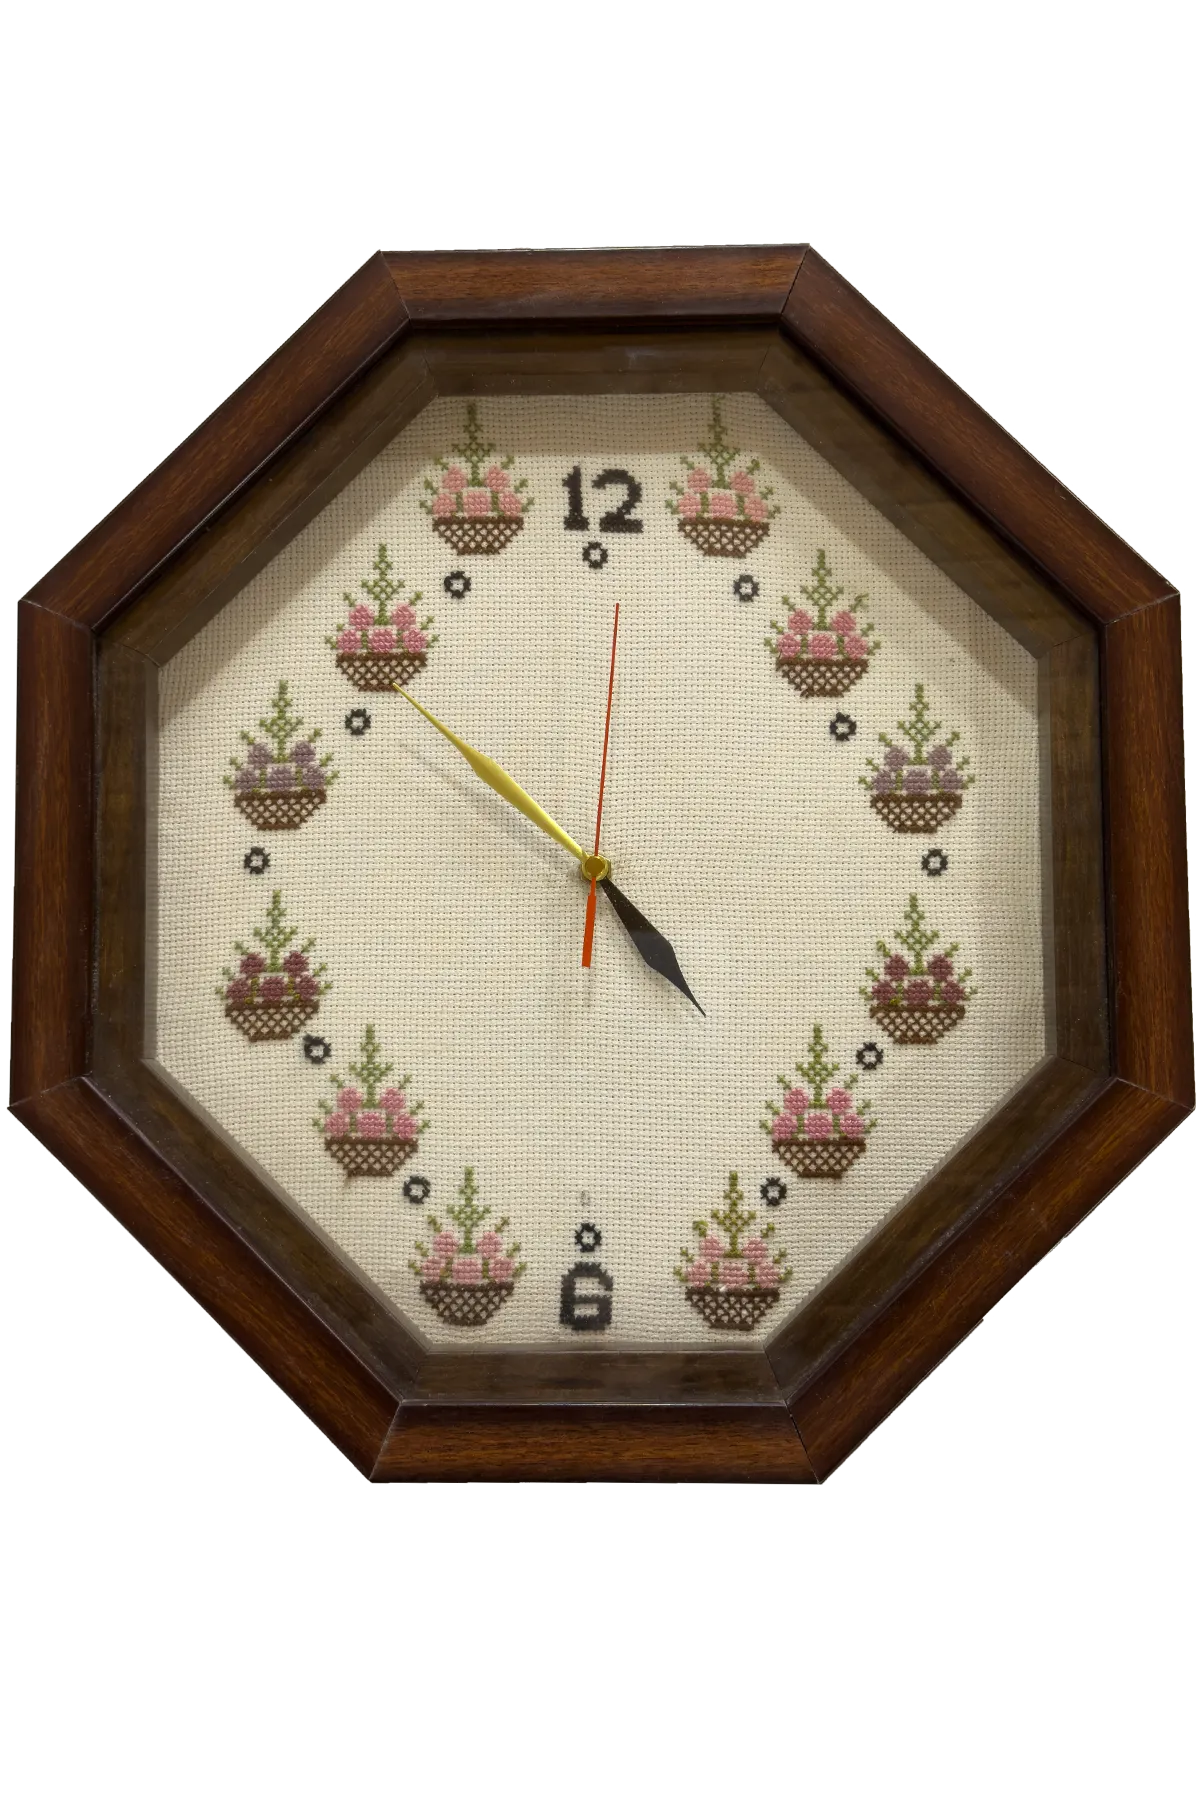 Embroidered wall clock